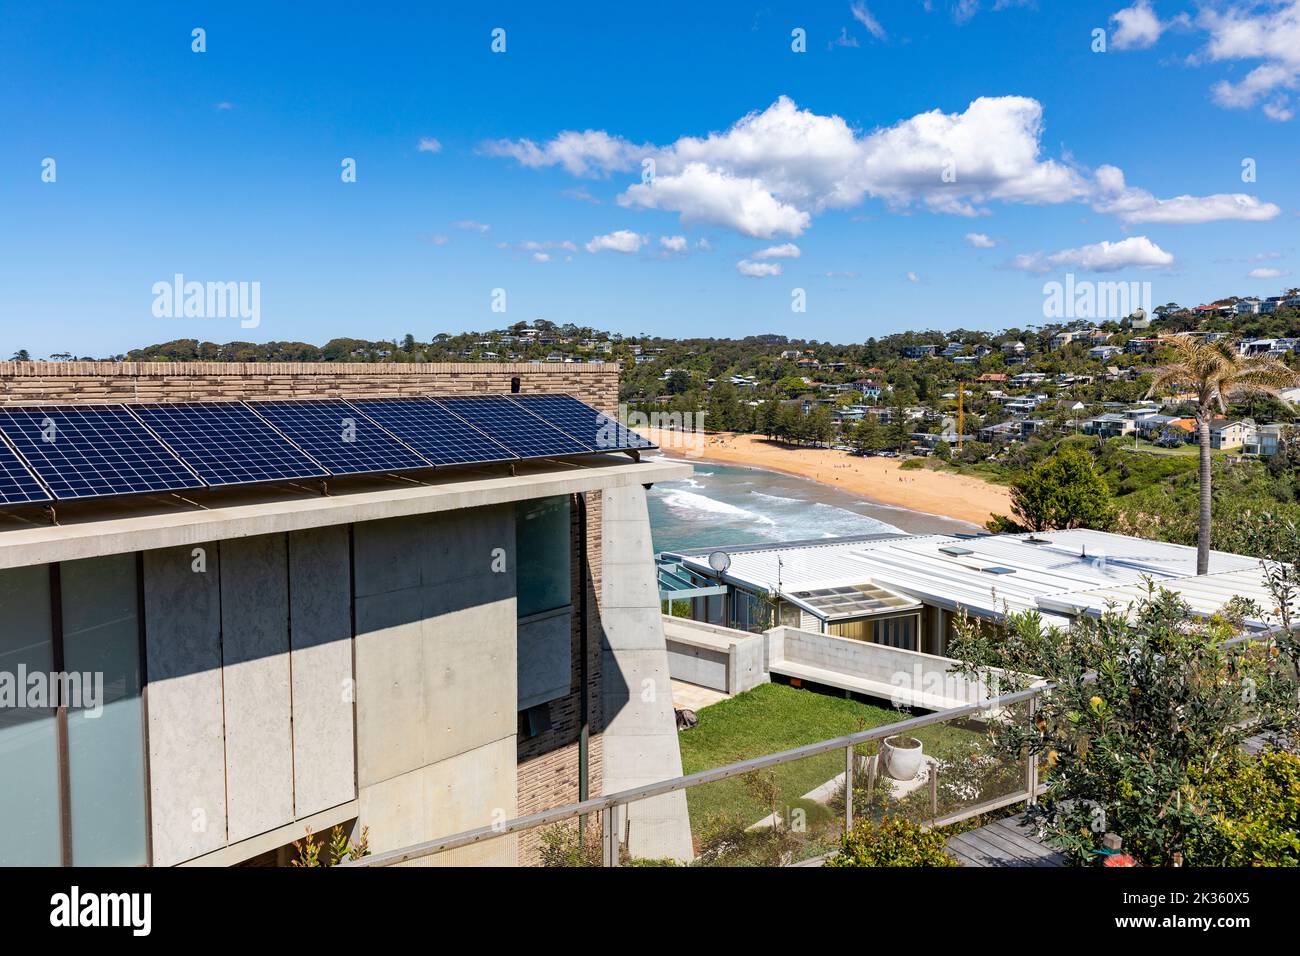 Solar panels PV fitted to a luxury beach house in Whale Beach suburb of Sydney,NSW,Australia, with views of the ocean and beach Stock Photo